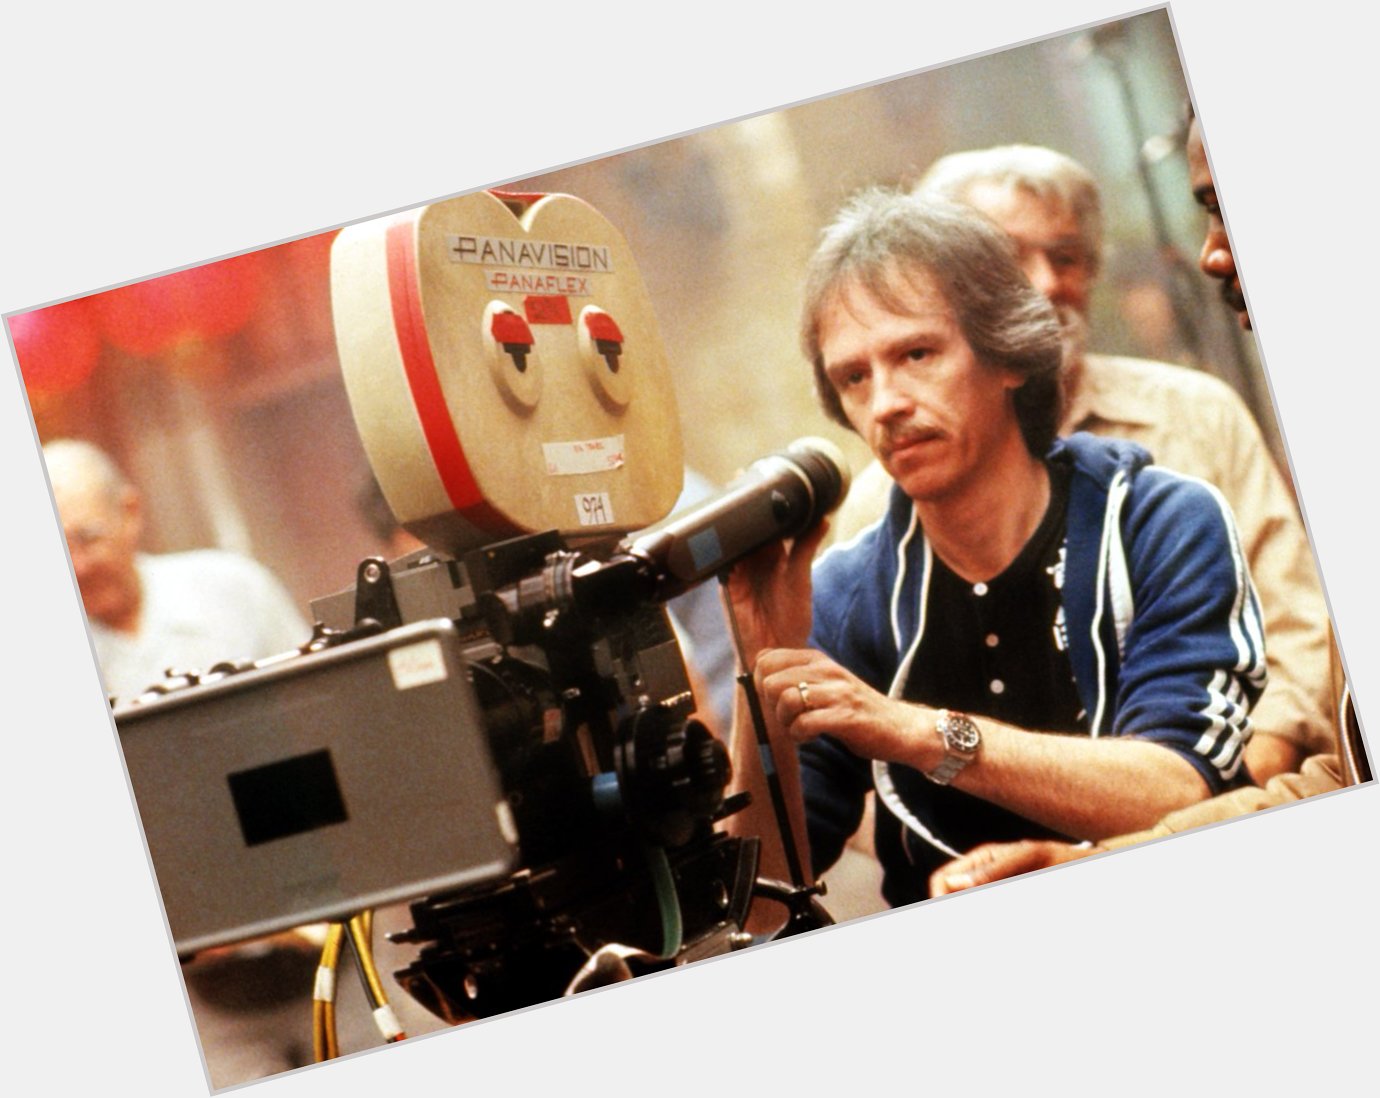 Sorry for the mix up earlier, the fog was heavy this morning. Happy 70th birthday John Carpenter! 